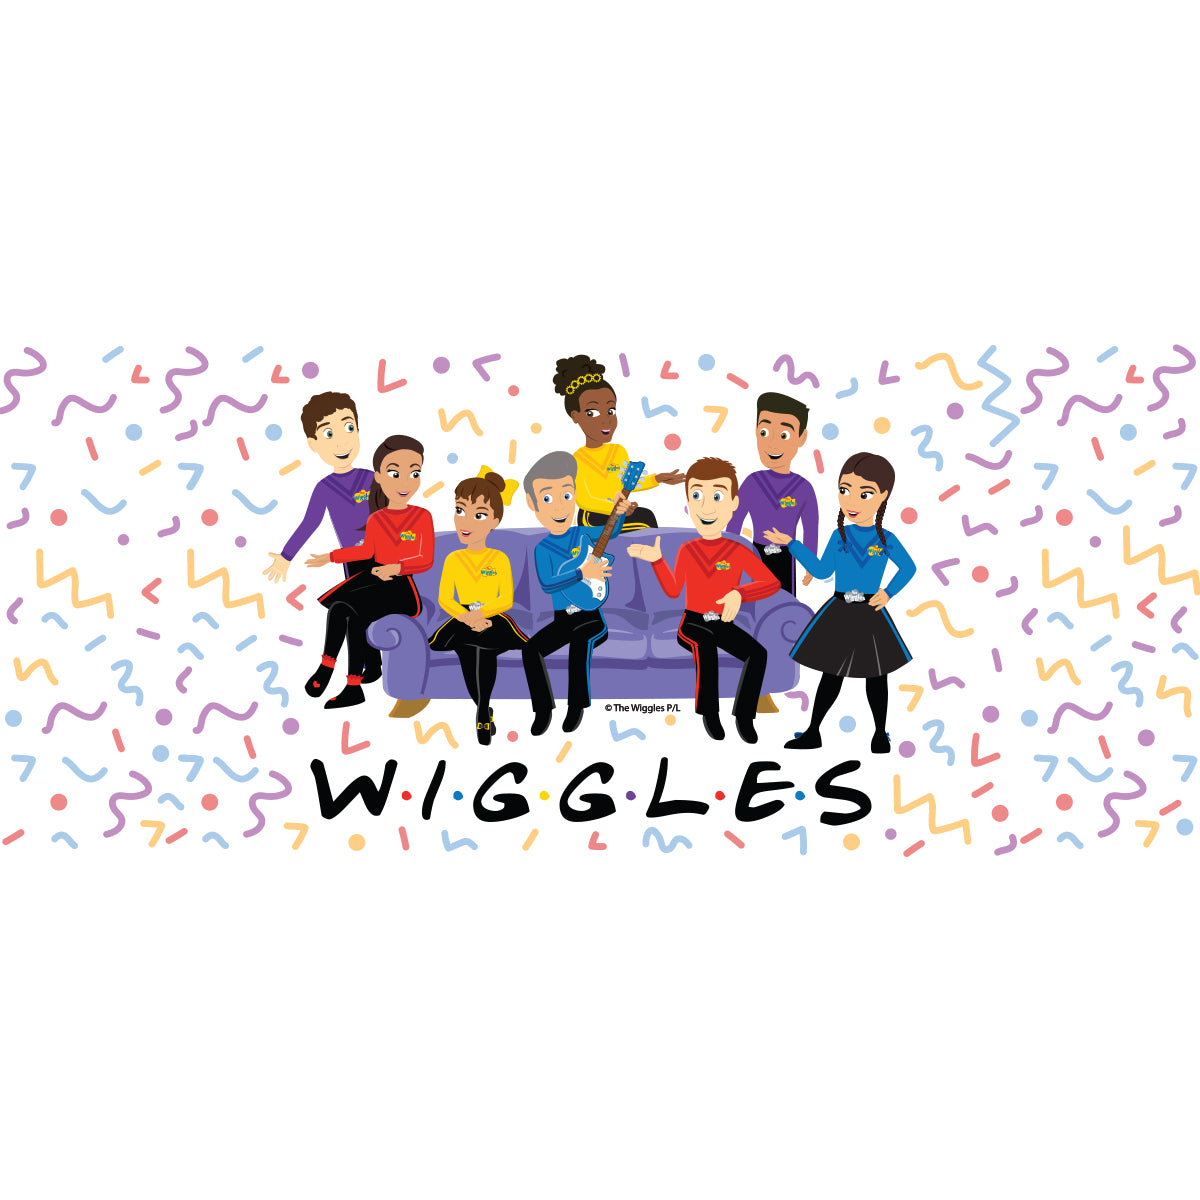 The Wiggles 